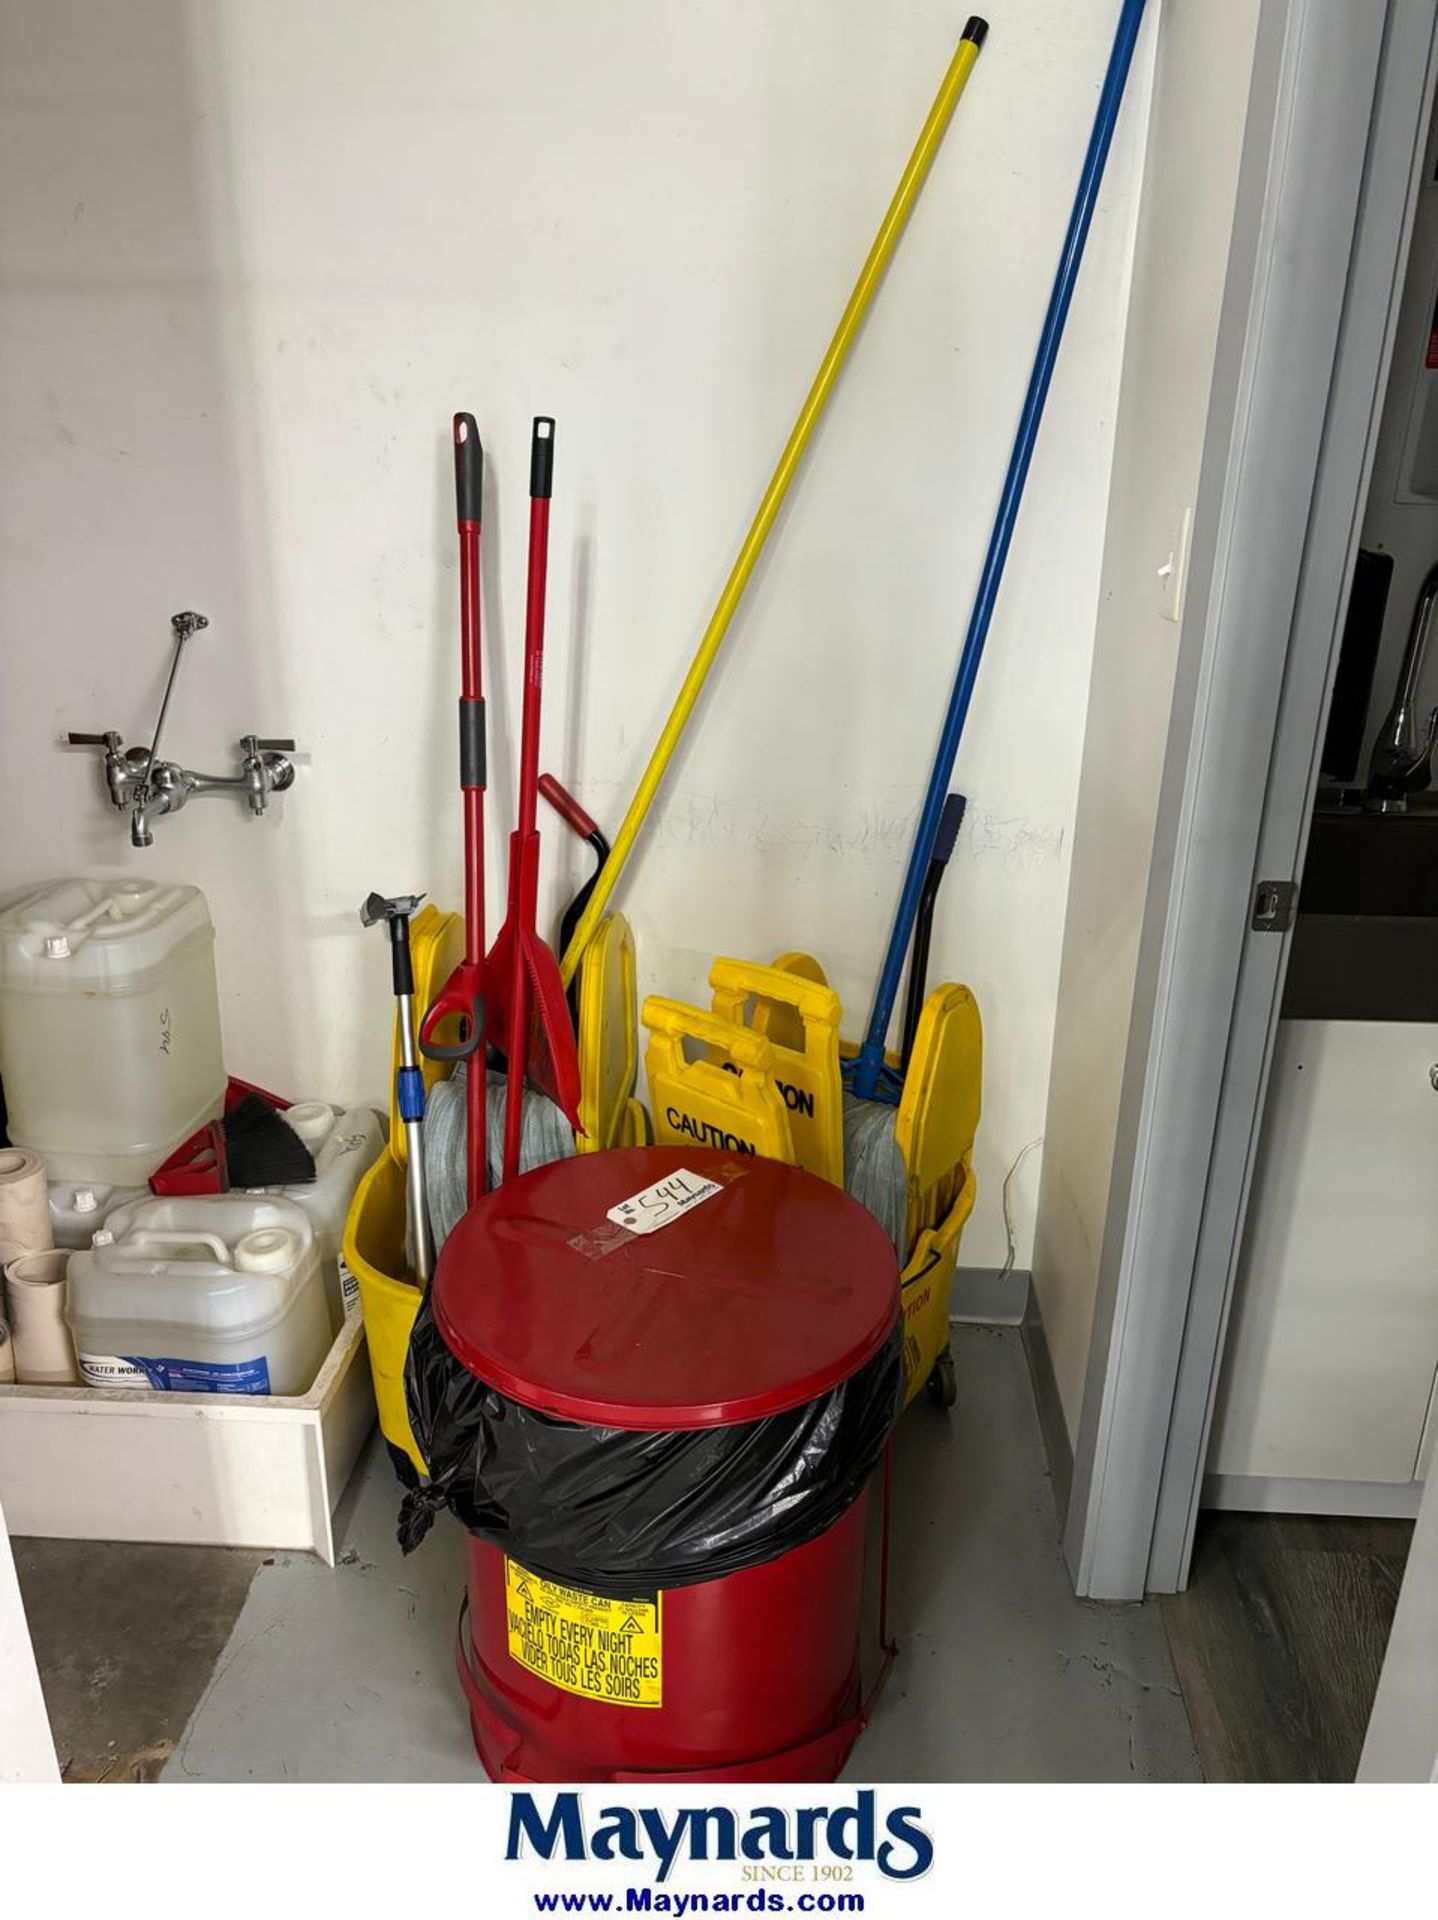 oil waste can, mop bucket and cleaning supplies